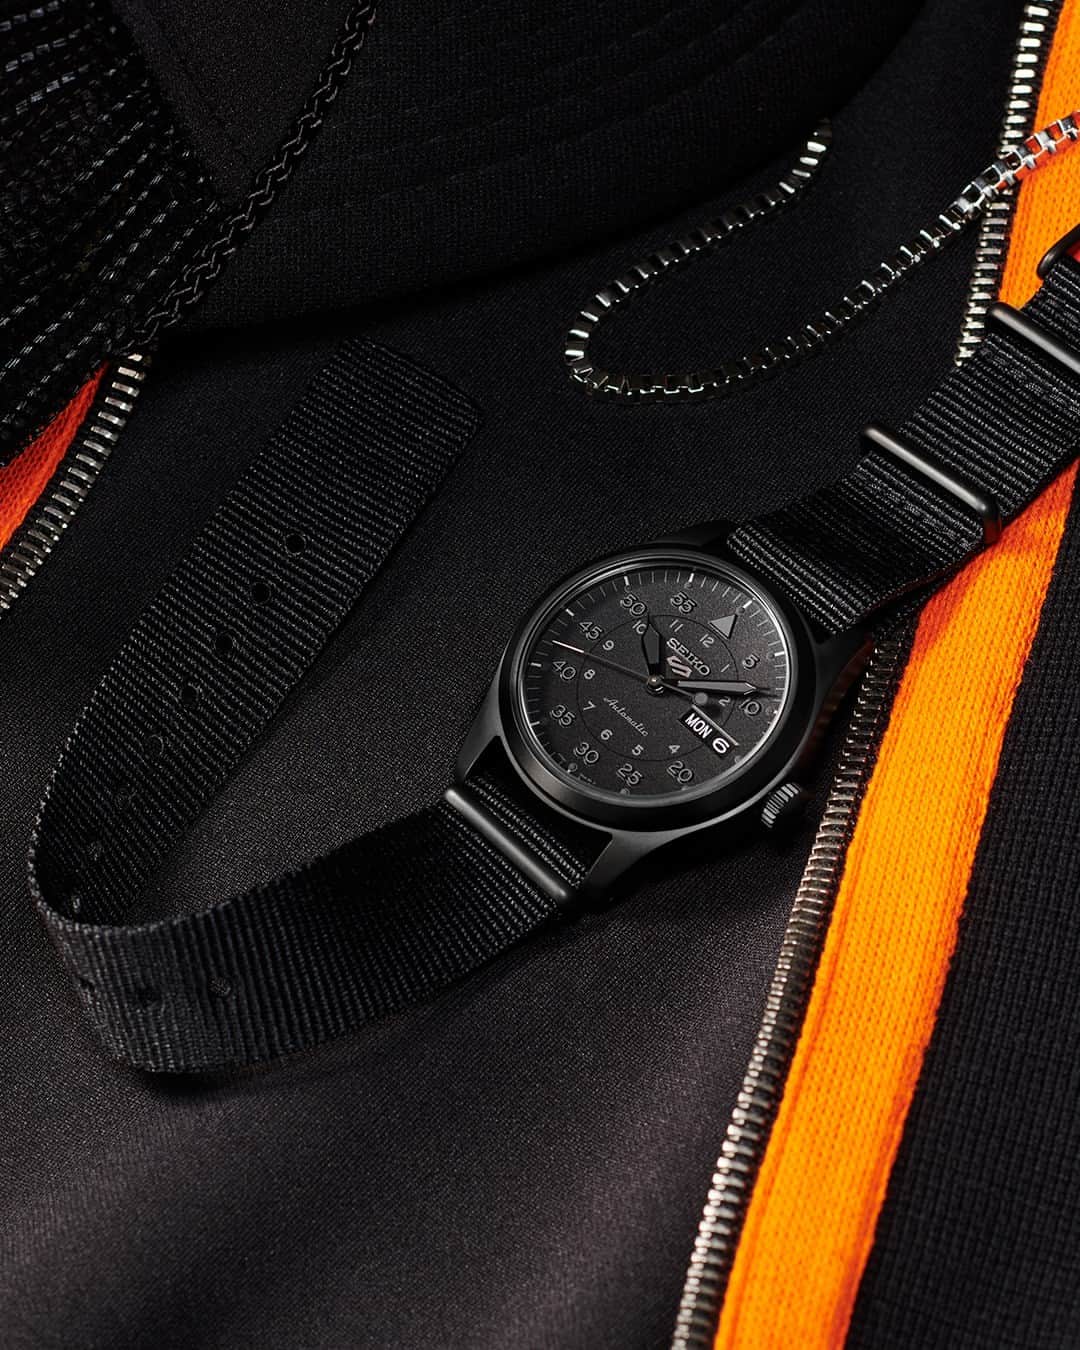 Seiko Watchesのインスタグラム：「Seiko 5 Sports is SCARY Good ⚫🟠 - Pairing all-black street-style with a design inspired by vintage field/military looks, #SRPJ11 adds some intrigue to your everyday attire, especially on a day dedicated to looking scary...good!  #Seiko #Seiko5Sports #ShowYourStyle」